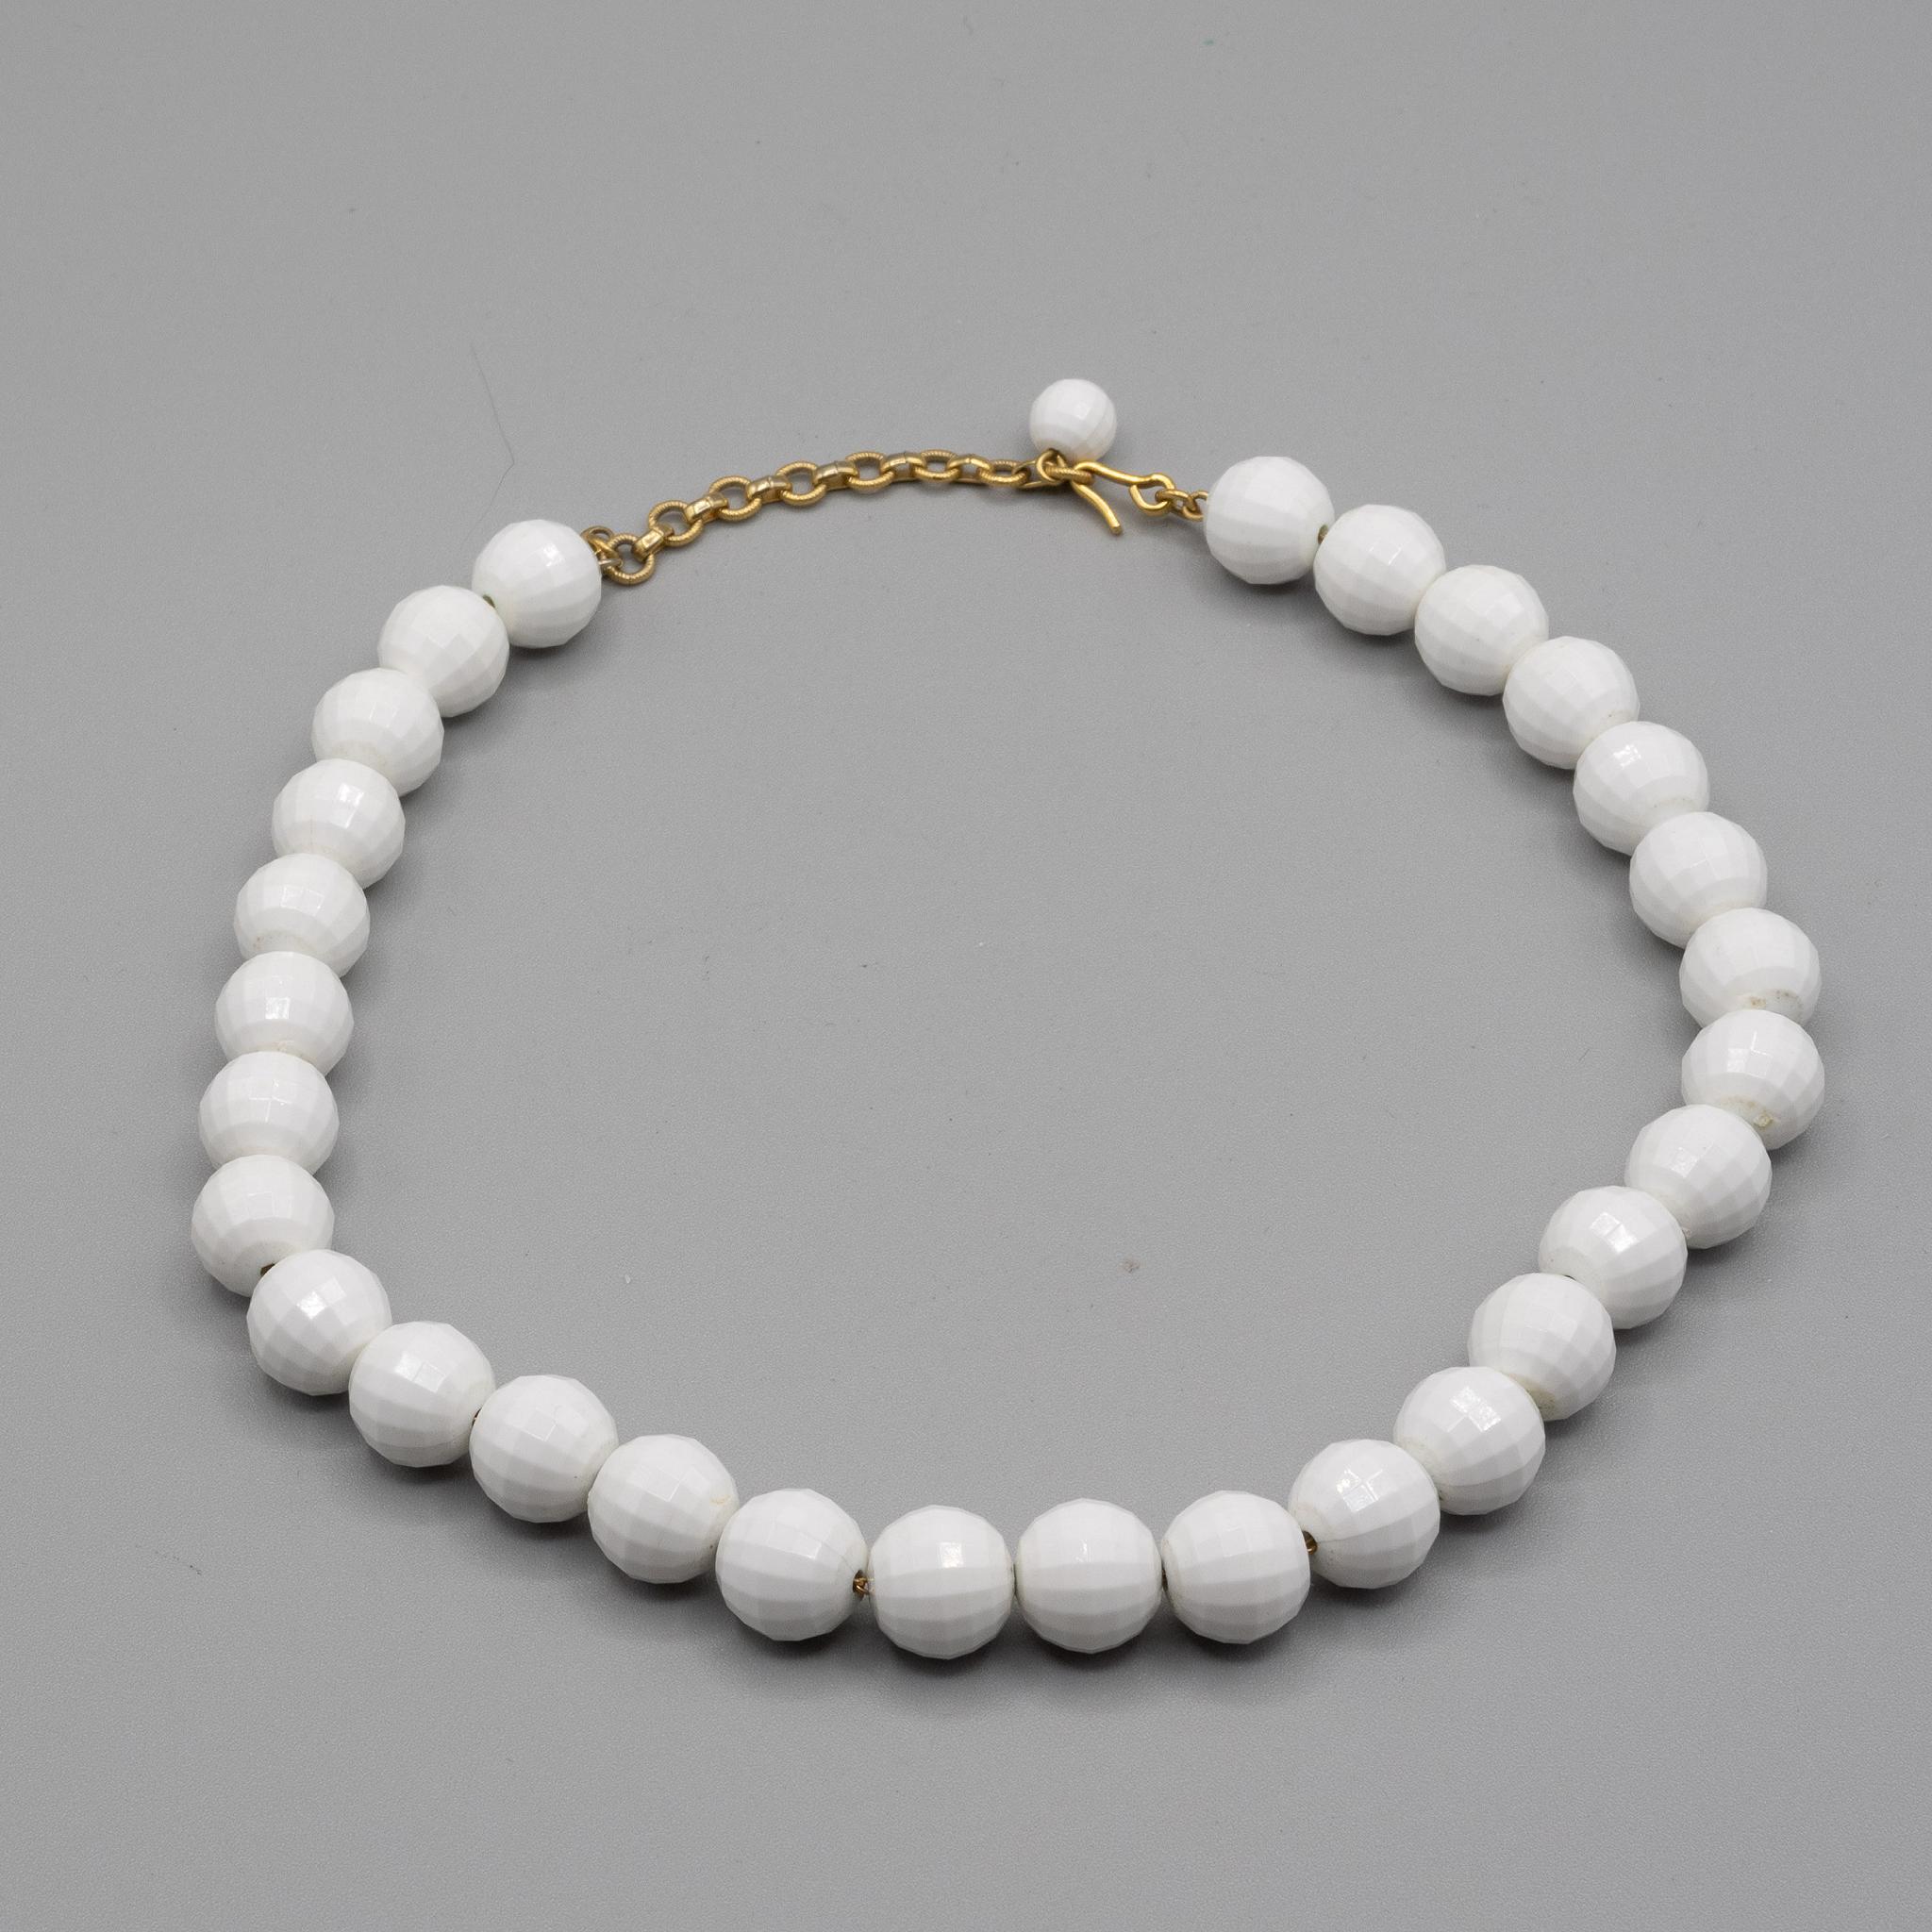 Monet+White+Faceted+Beads+Necklace picture 2